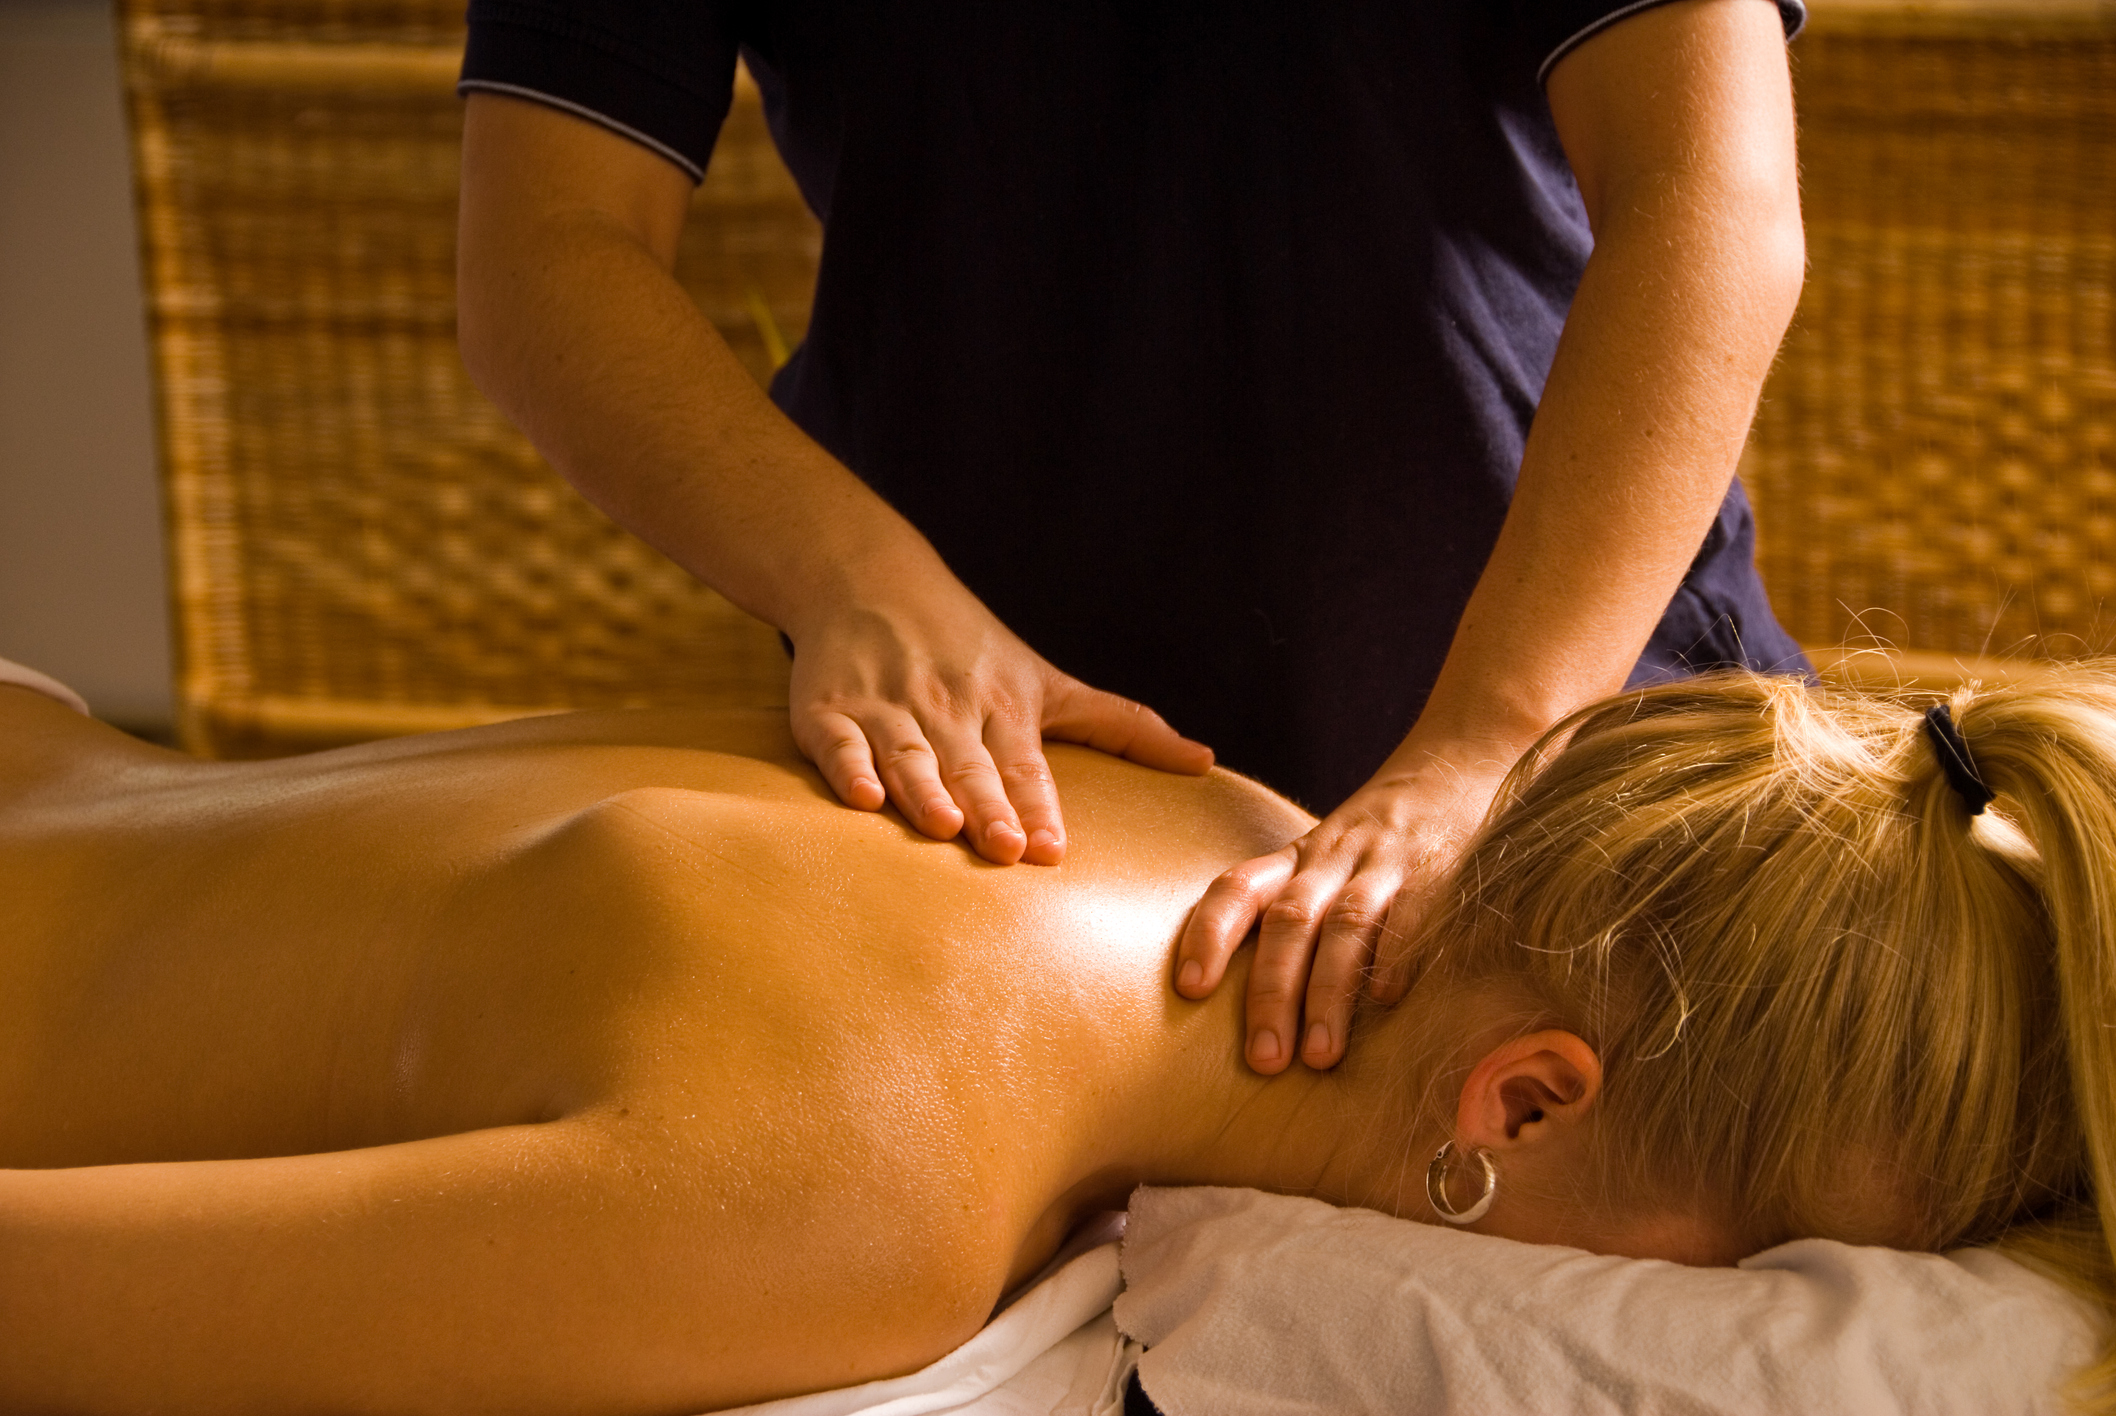 Massage is the only way to unwind from a long day of travel.